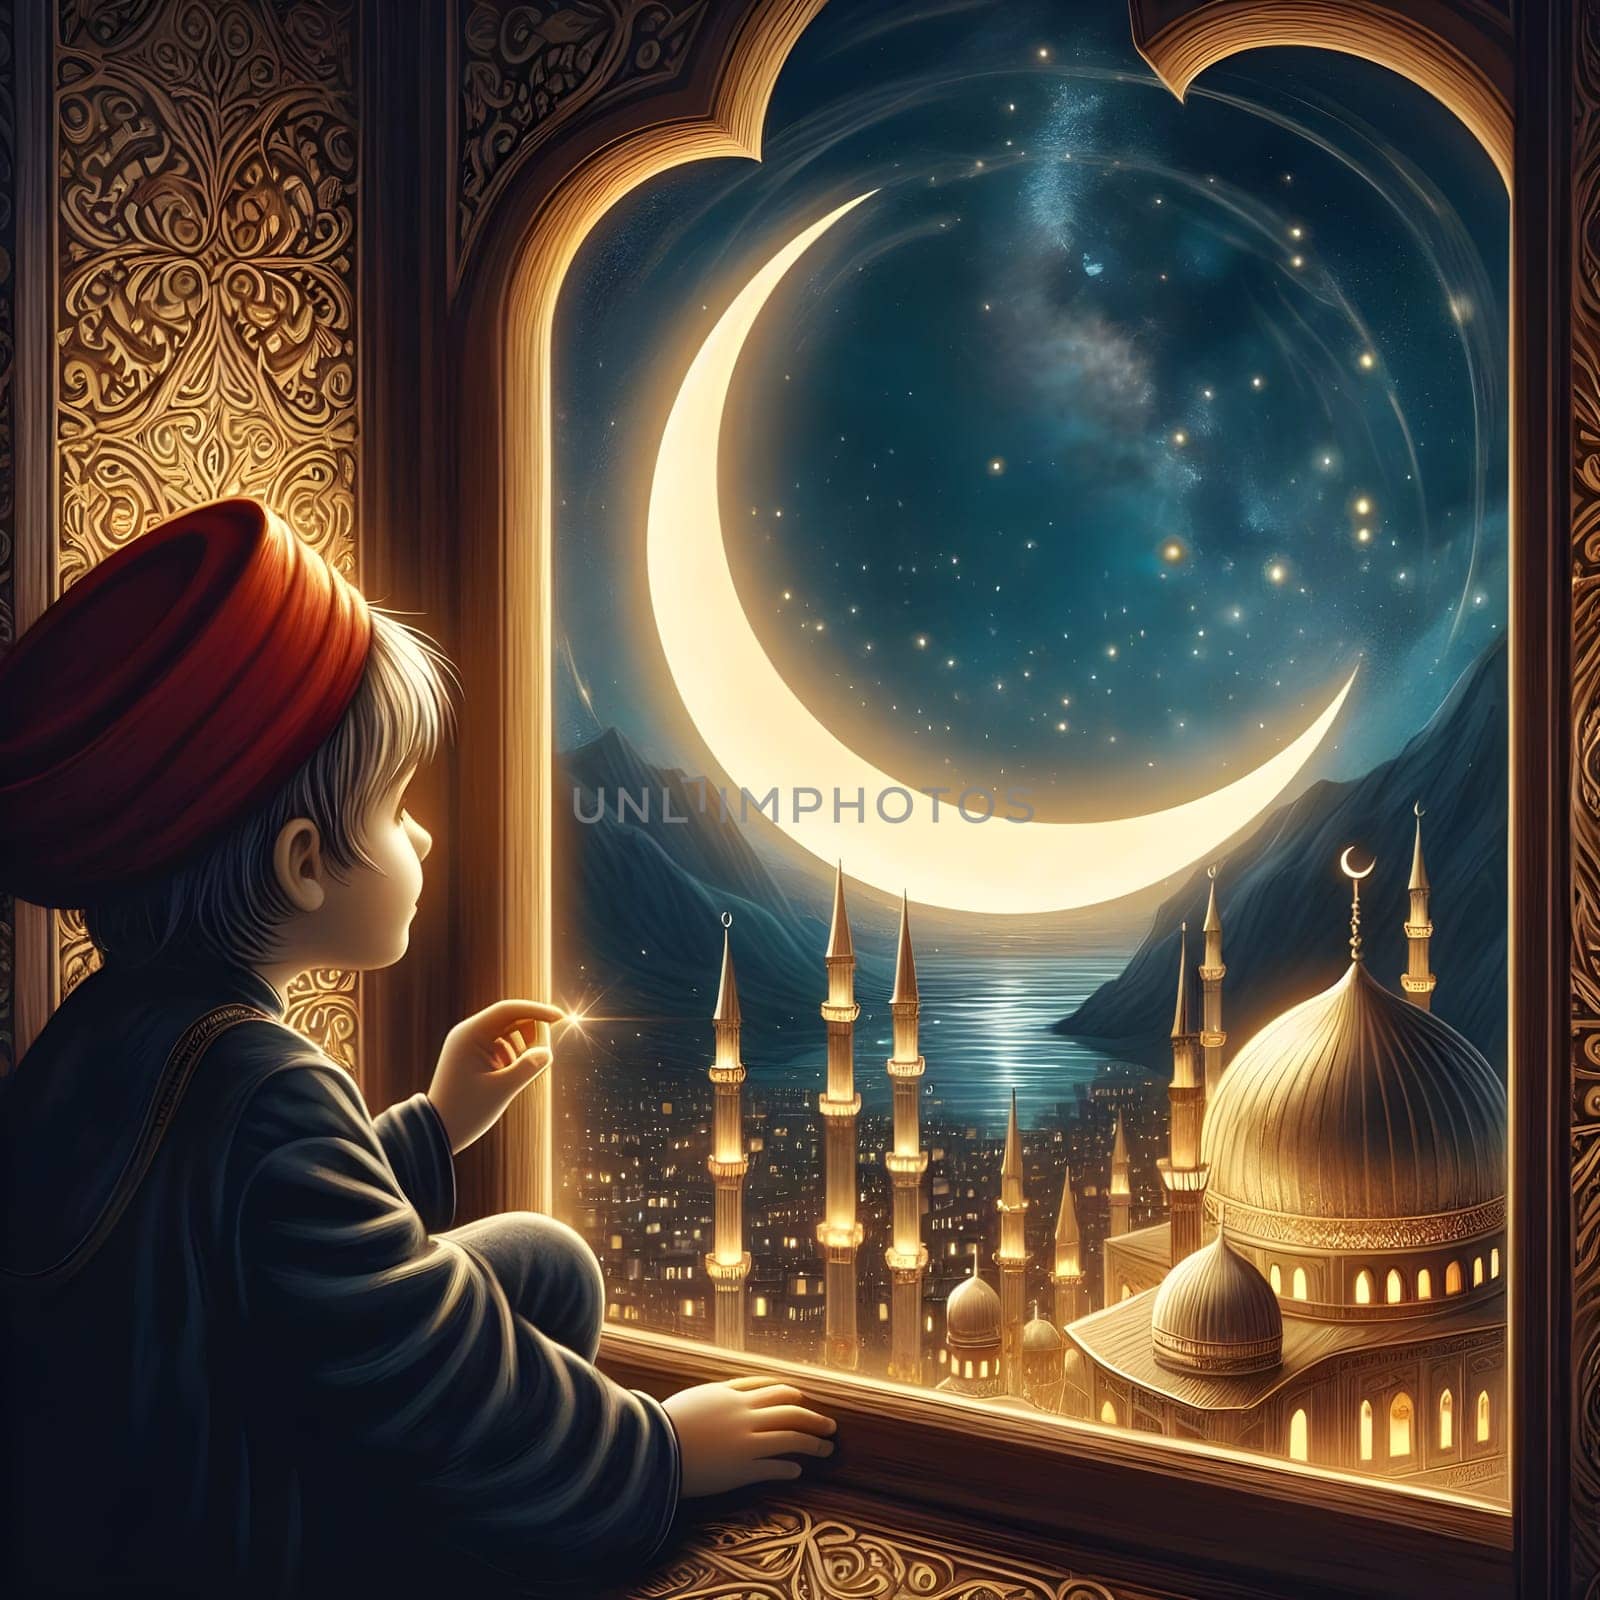 A cute child observing the crescent moon through an ornate window, with reflections of the night sky in his eyes. Last of Happy ramadan, ramadhan, ramazan. High quality photo